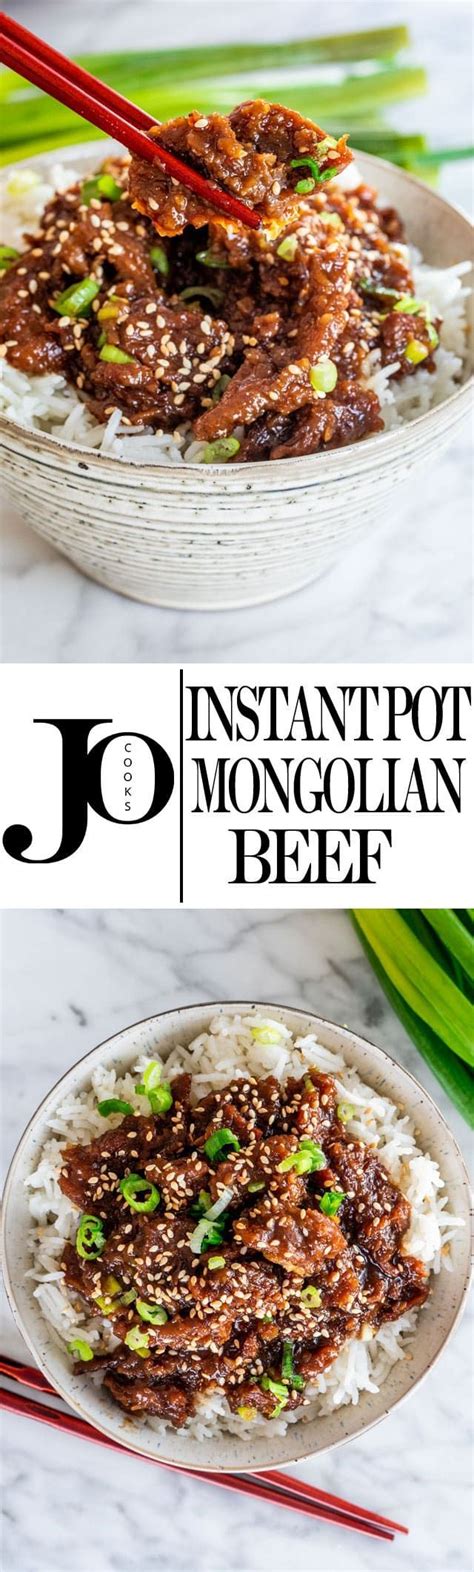 If you don't then it's time to jump on this bandwagon as it's all the rage right now for good reason! This Instant Pot Mongolian Beef is your answer to "take ...